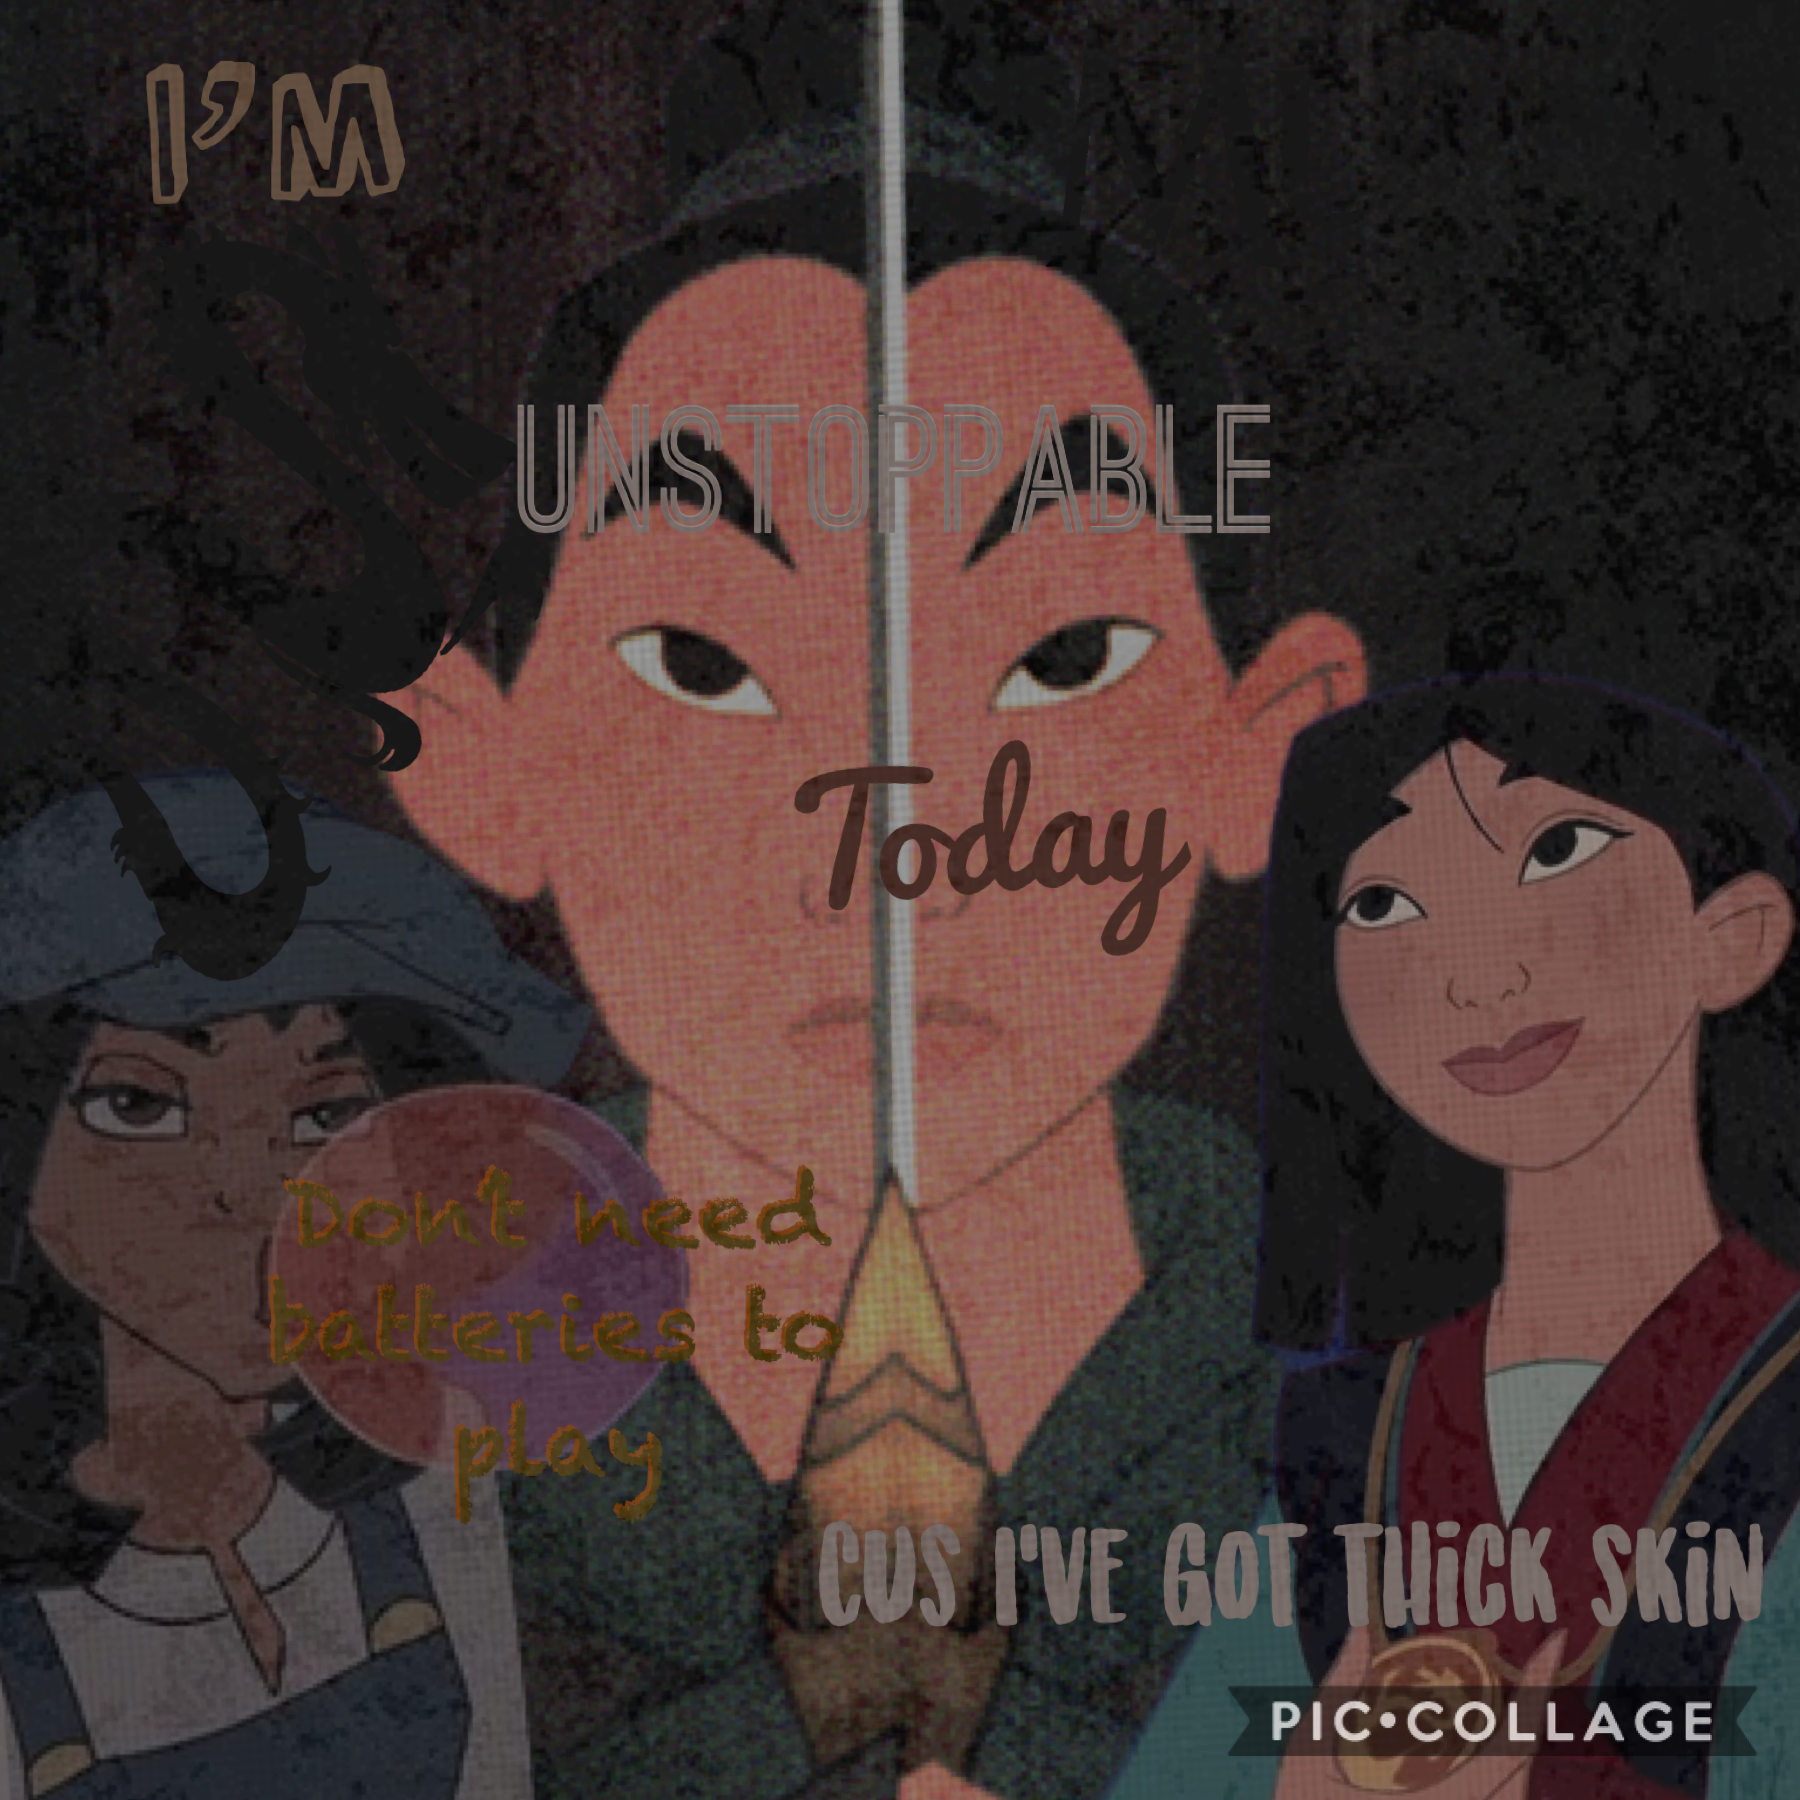 ✨tap✨
This is a Mulan collage I hope y’all like it lol!